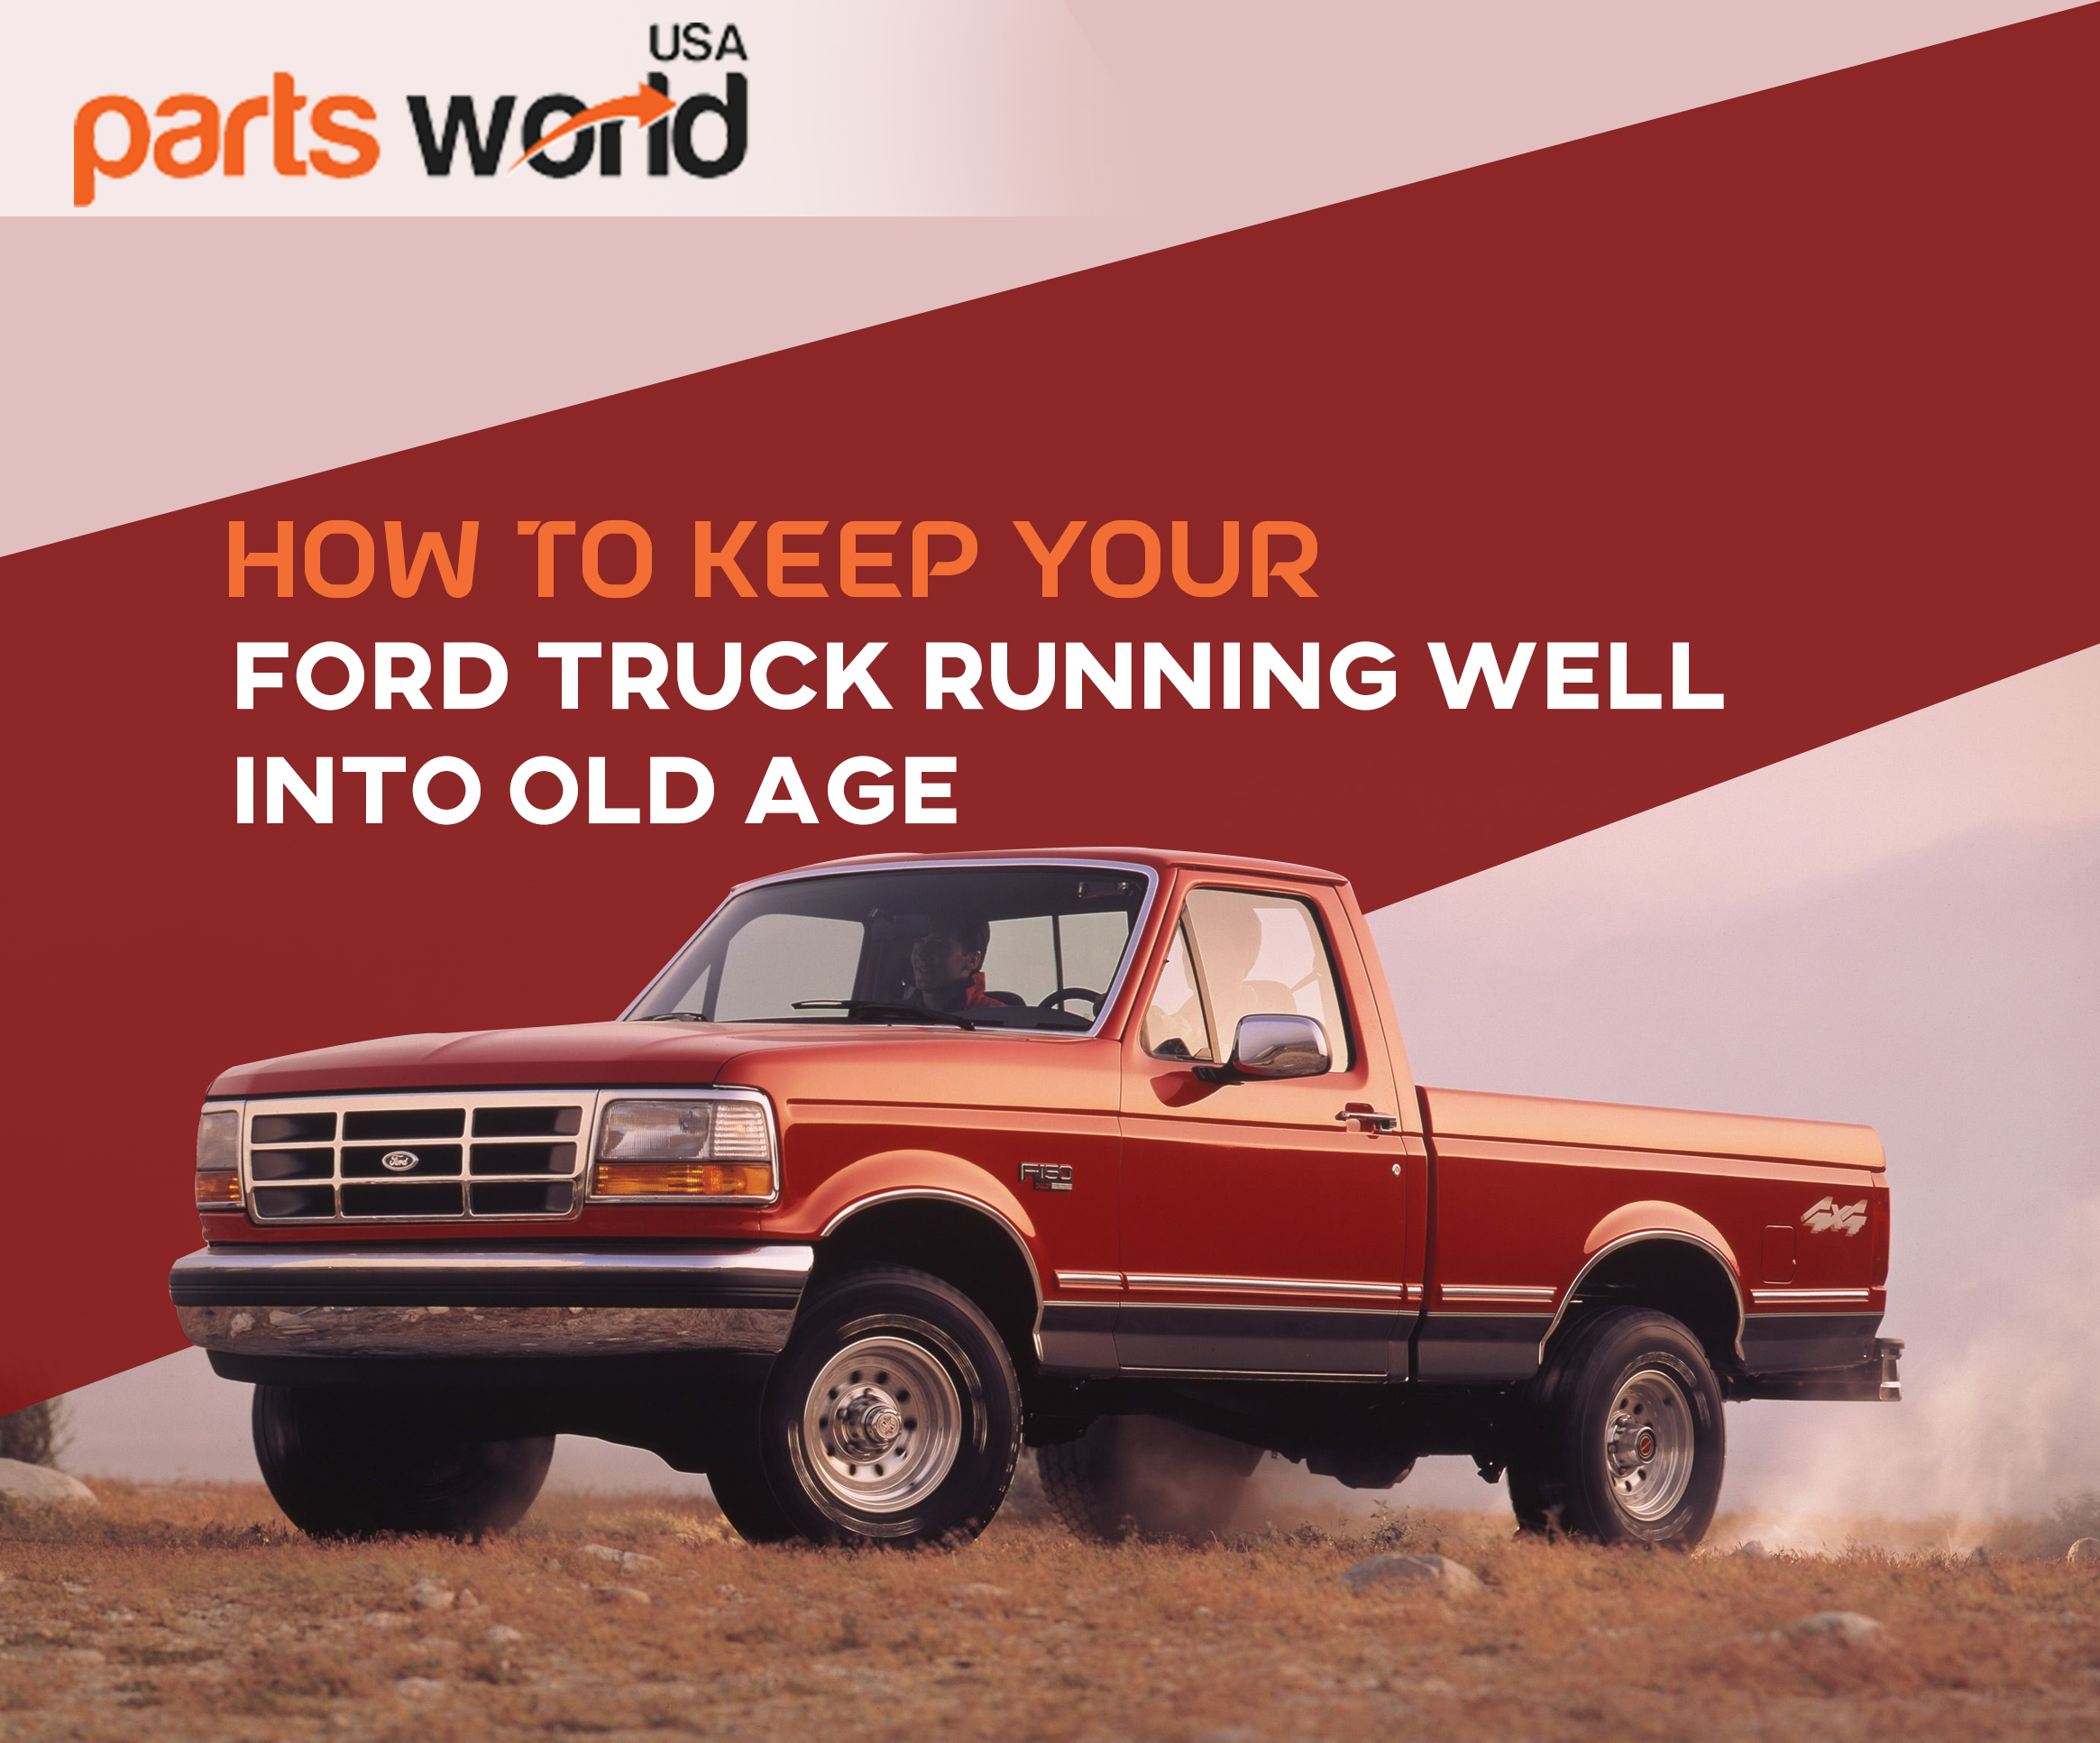 How to Keep Your Ford Truck Running Well into Old Age